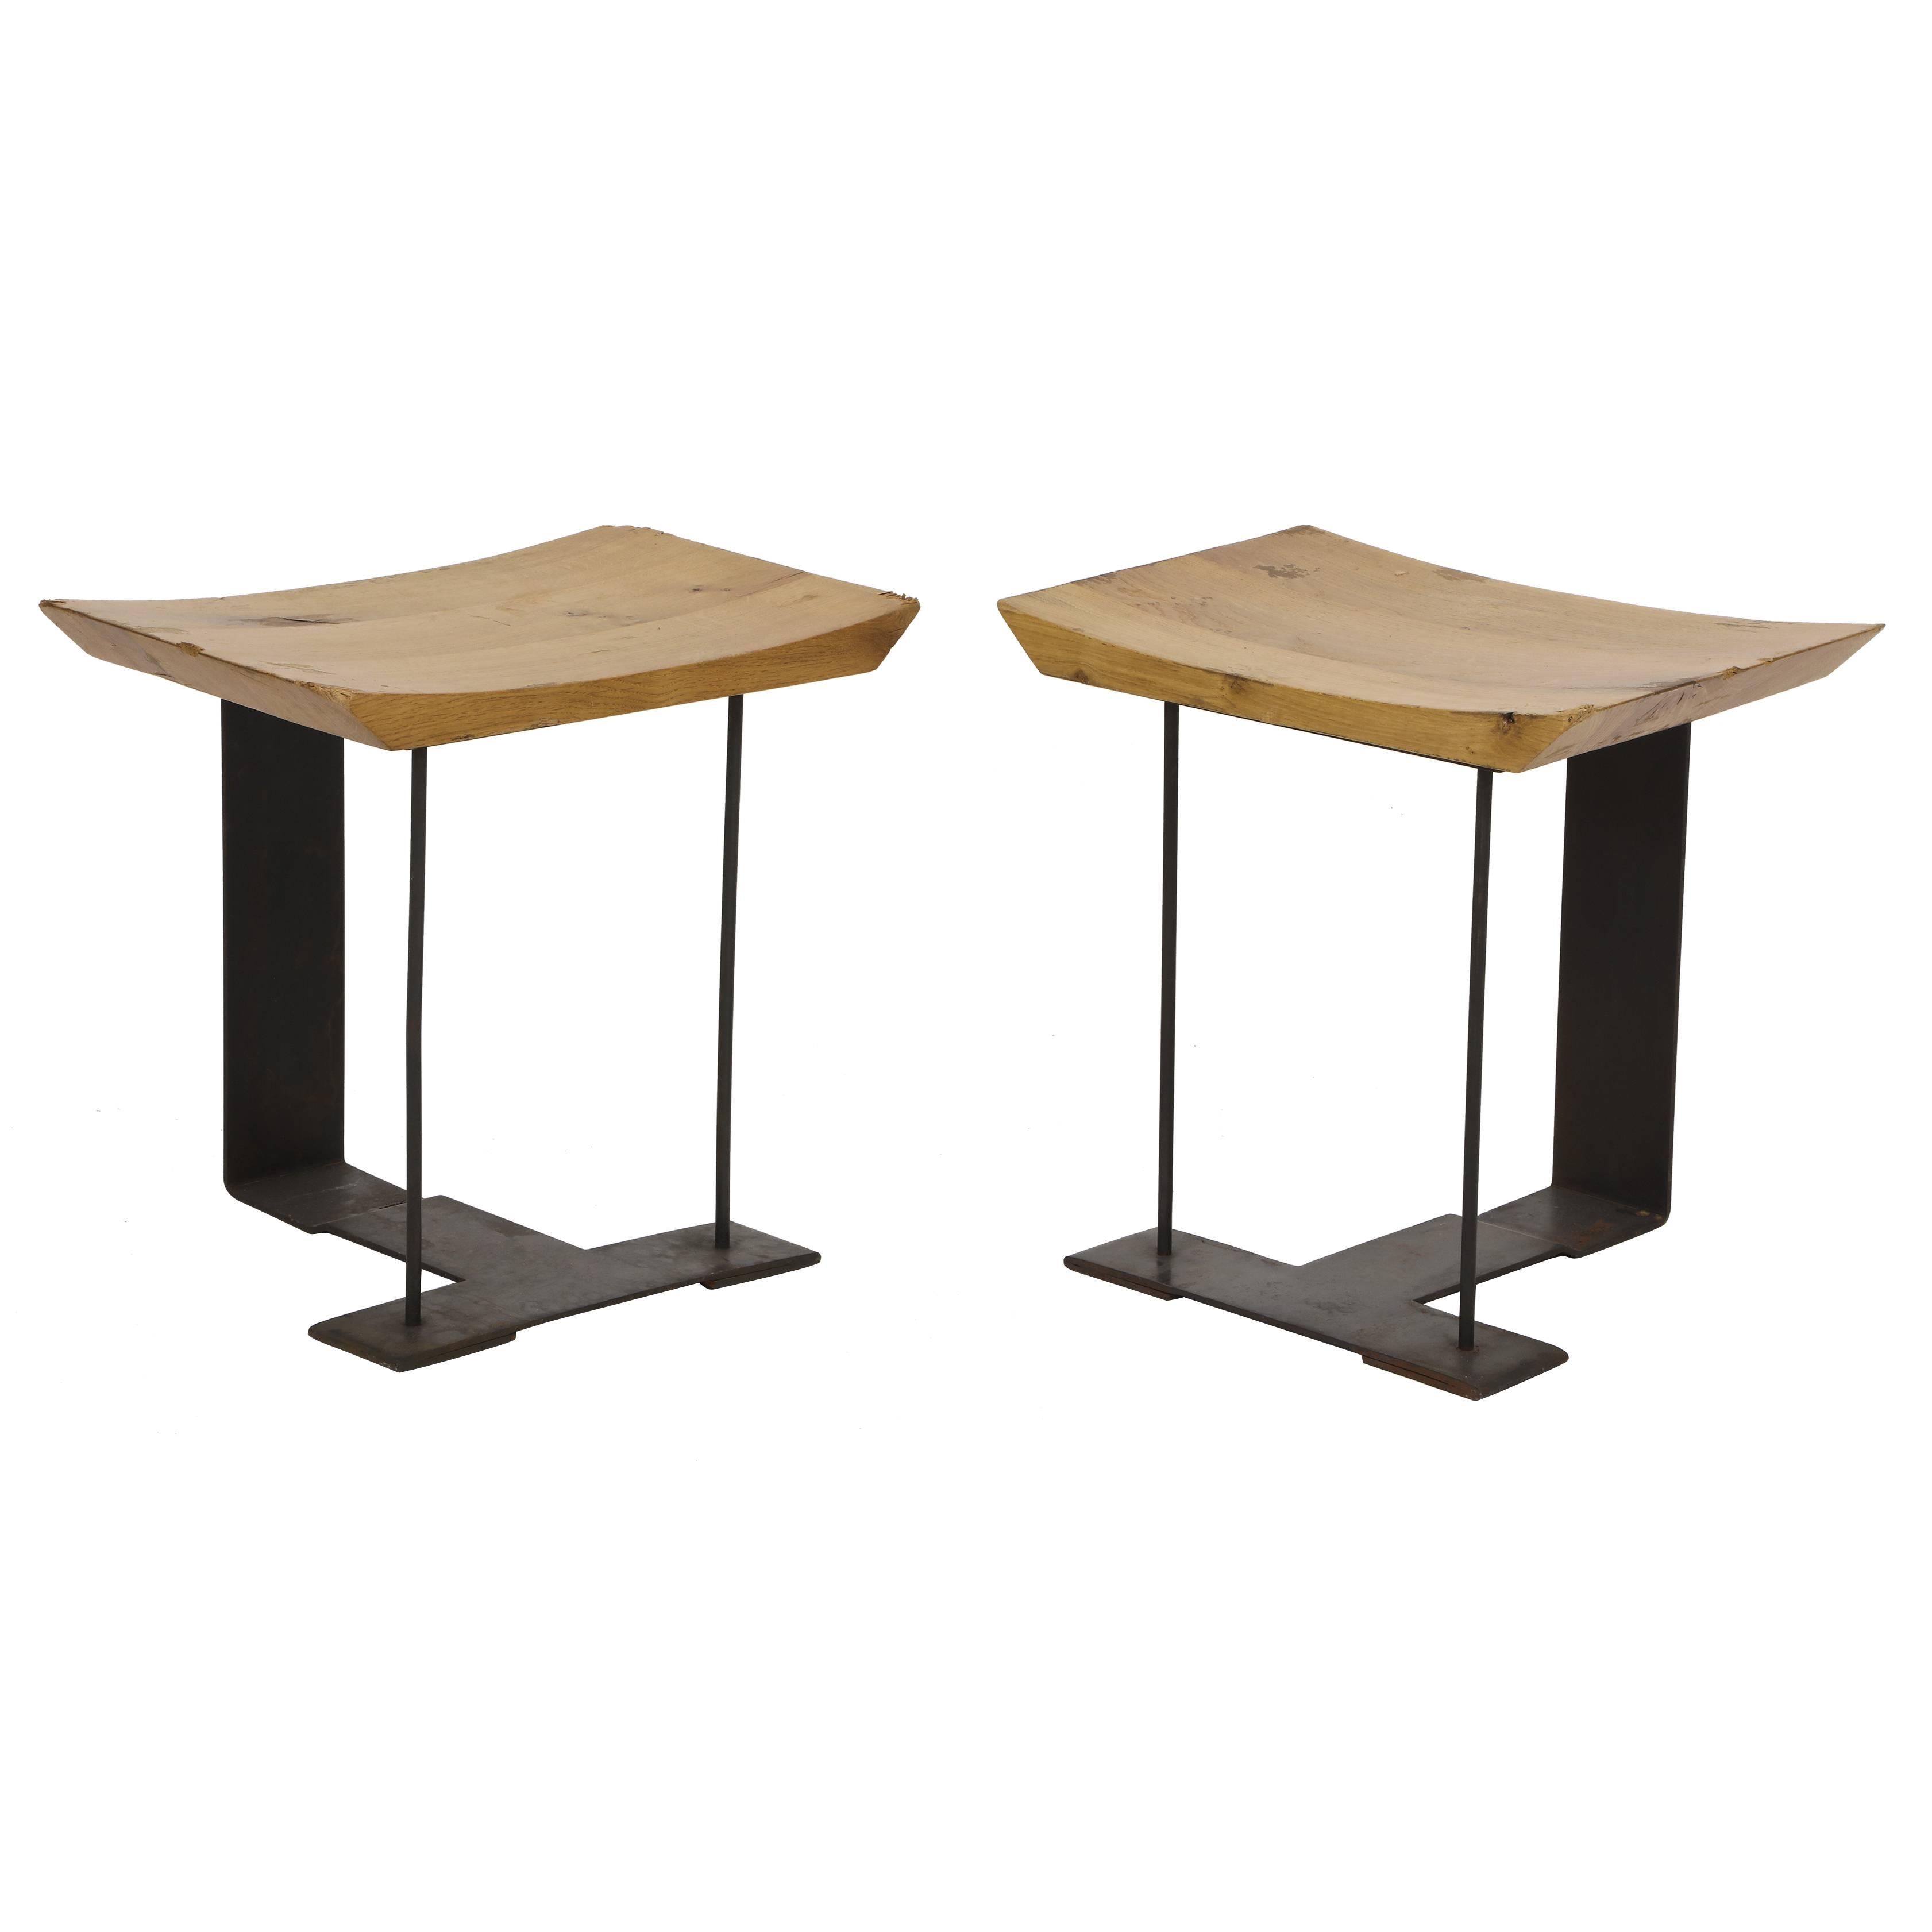 Iron and Wood Stools after Pierre Chareau SN2 France 1920s-1930s Deco.

Iconic stools or side tables after Pierre Chareau. Iron and wood. Not sure when these specific pieces were made but the iron looks oxidized. The wood has some wear to a few